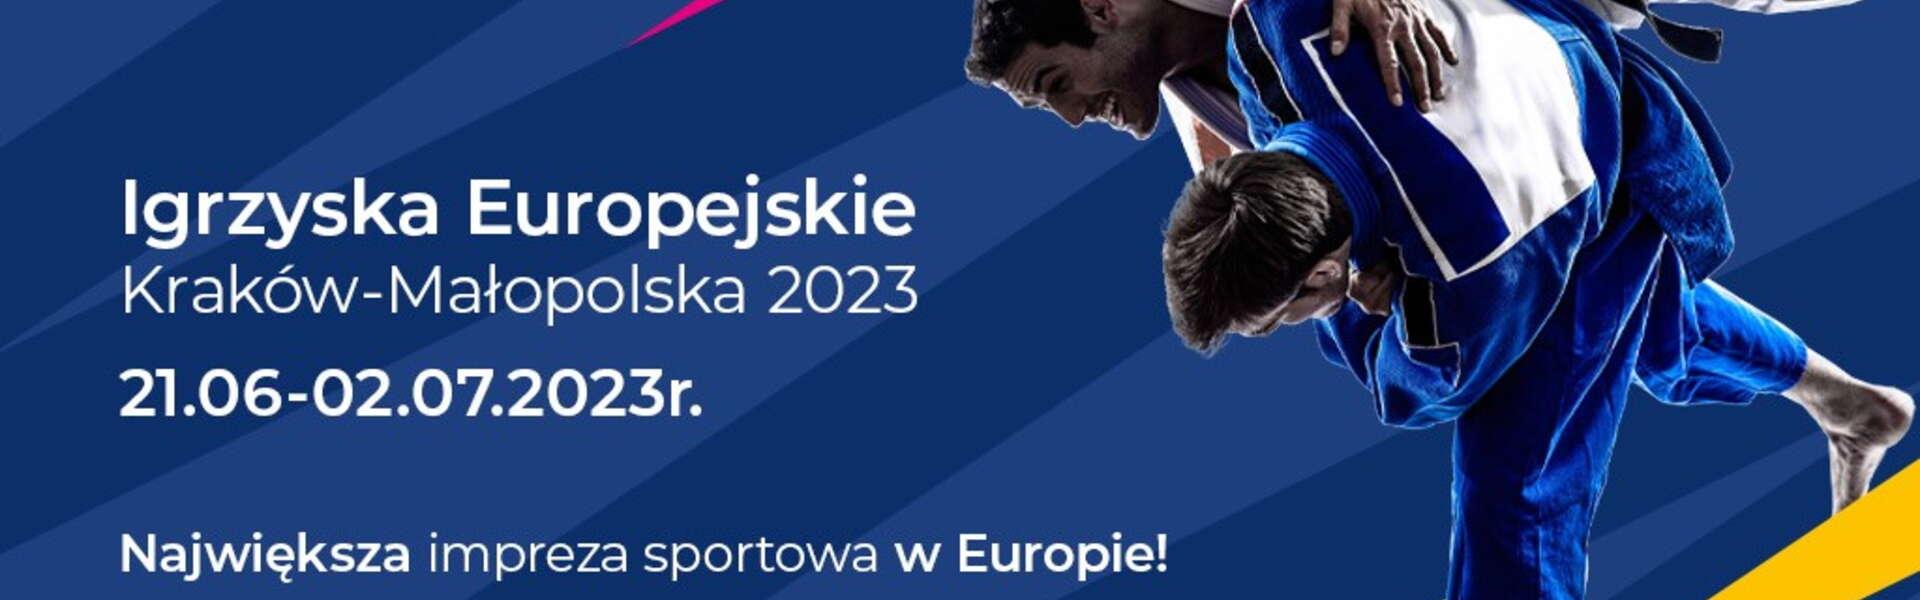 Graphics showing the European Games in Krakow. In the graphic you can see 2 men in kimonos fighting each other.